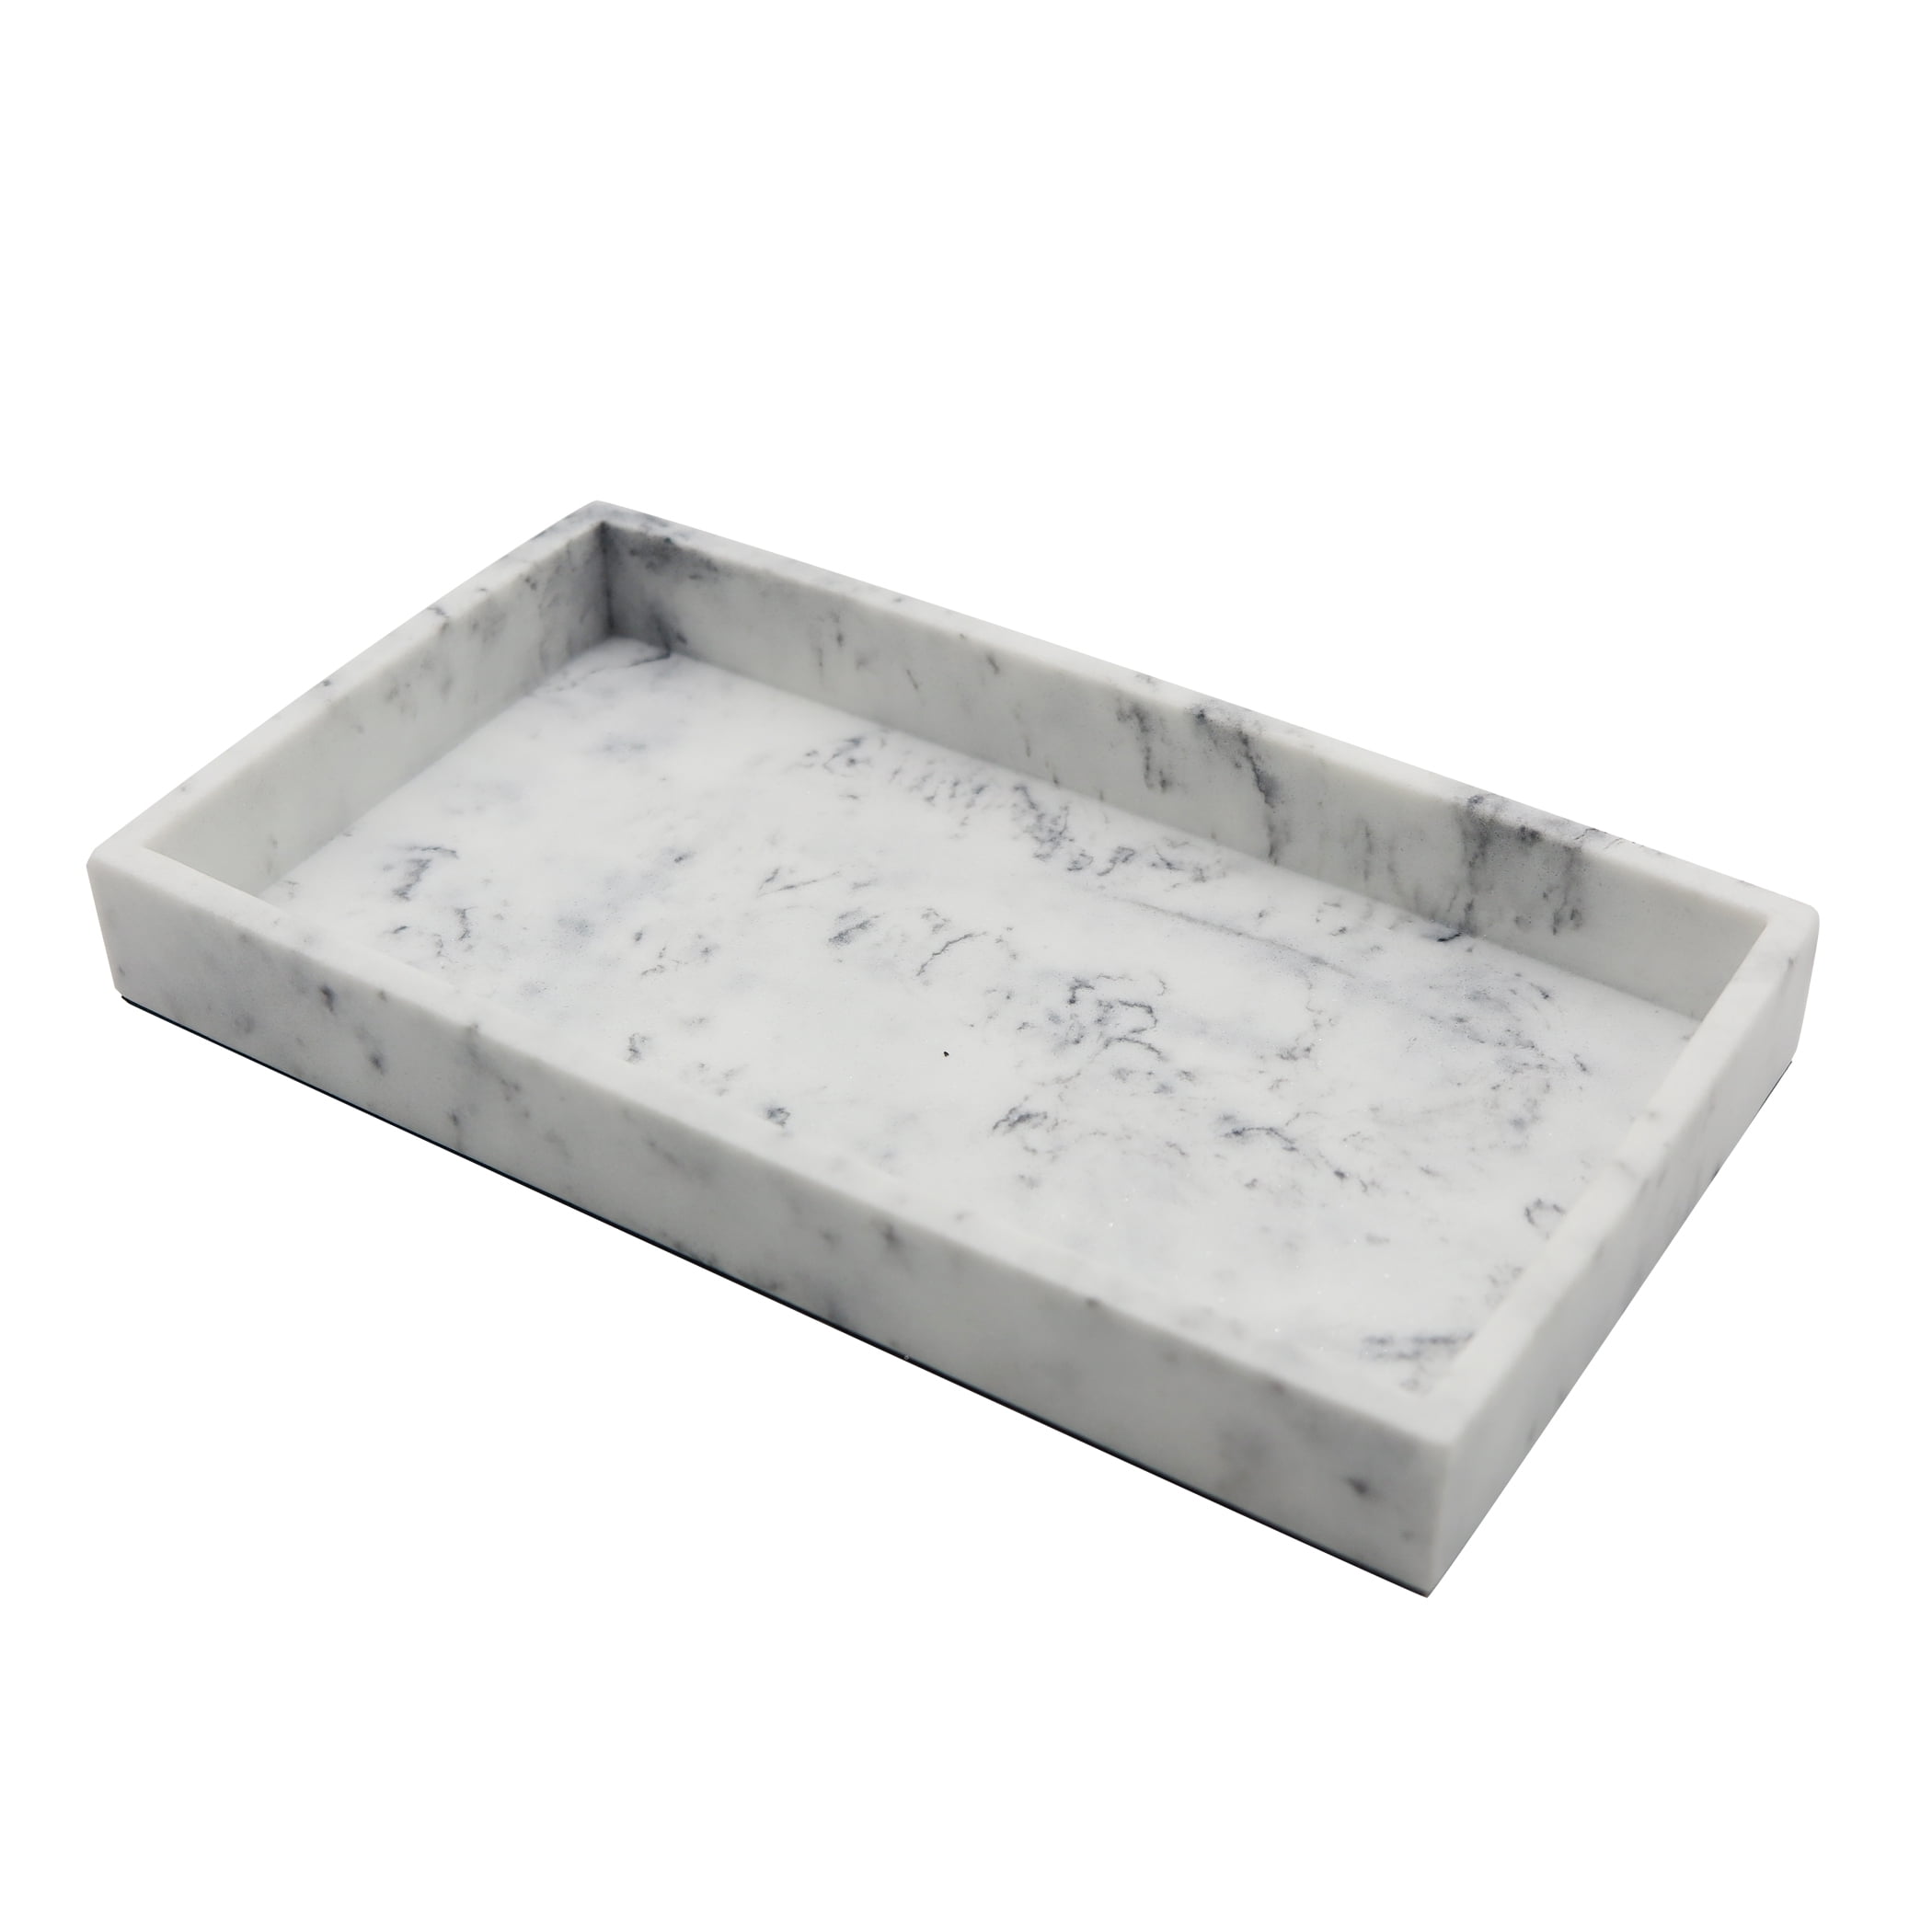  April Box Valet Marble Tray set of 2 – Marble Console Table  Trays – Key Trays –Vanity Trays–Jewelry dish– Decorative Tray Organizer for  Watch, Wallet, Perfume, Keys – Made of Thick